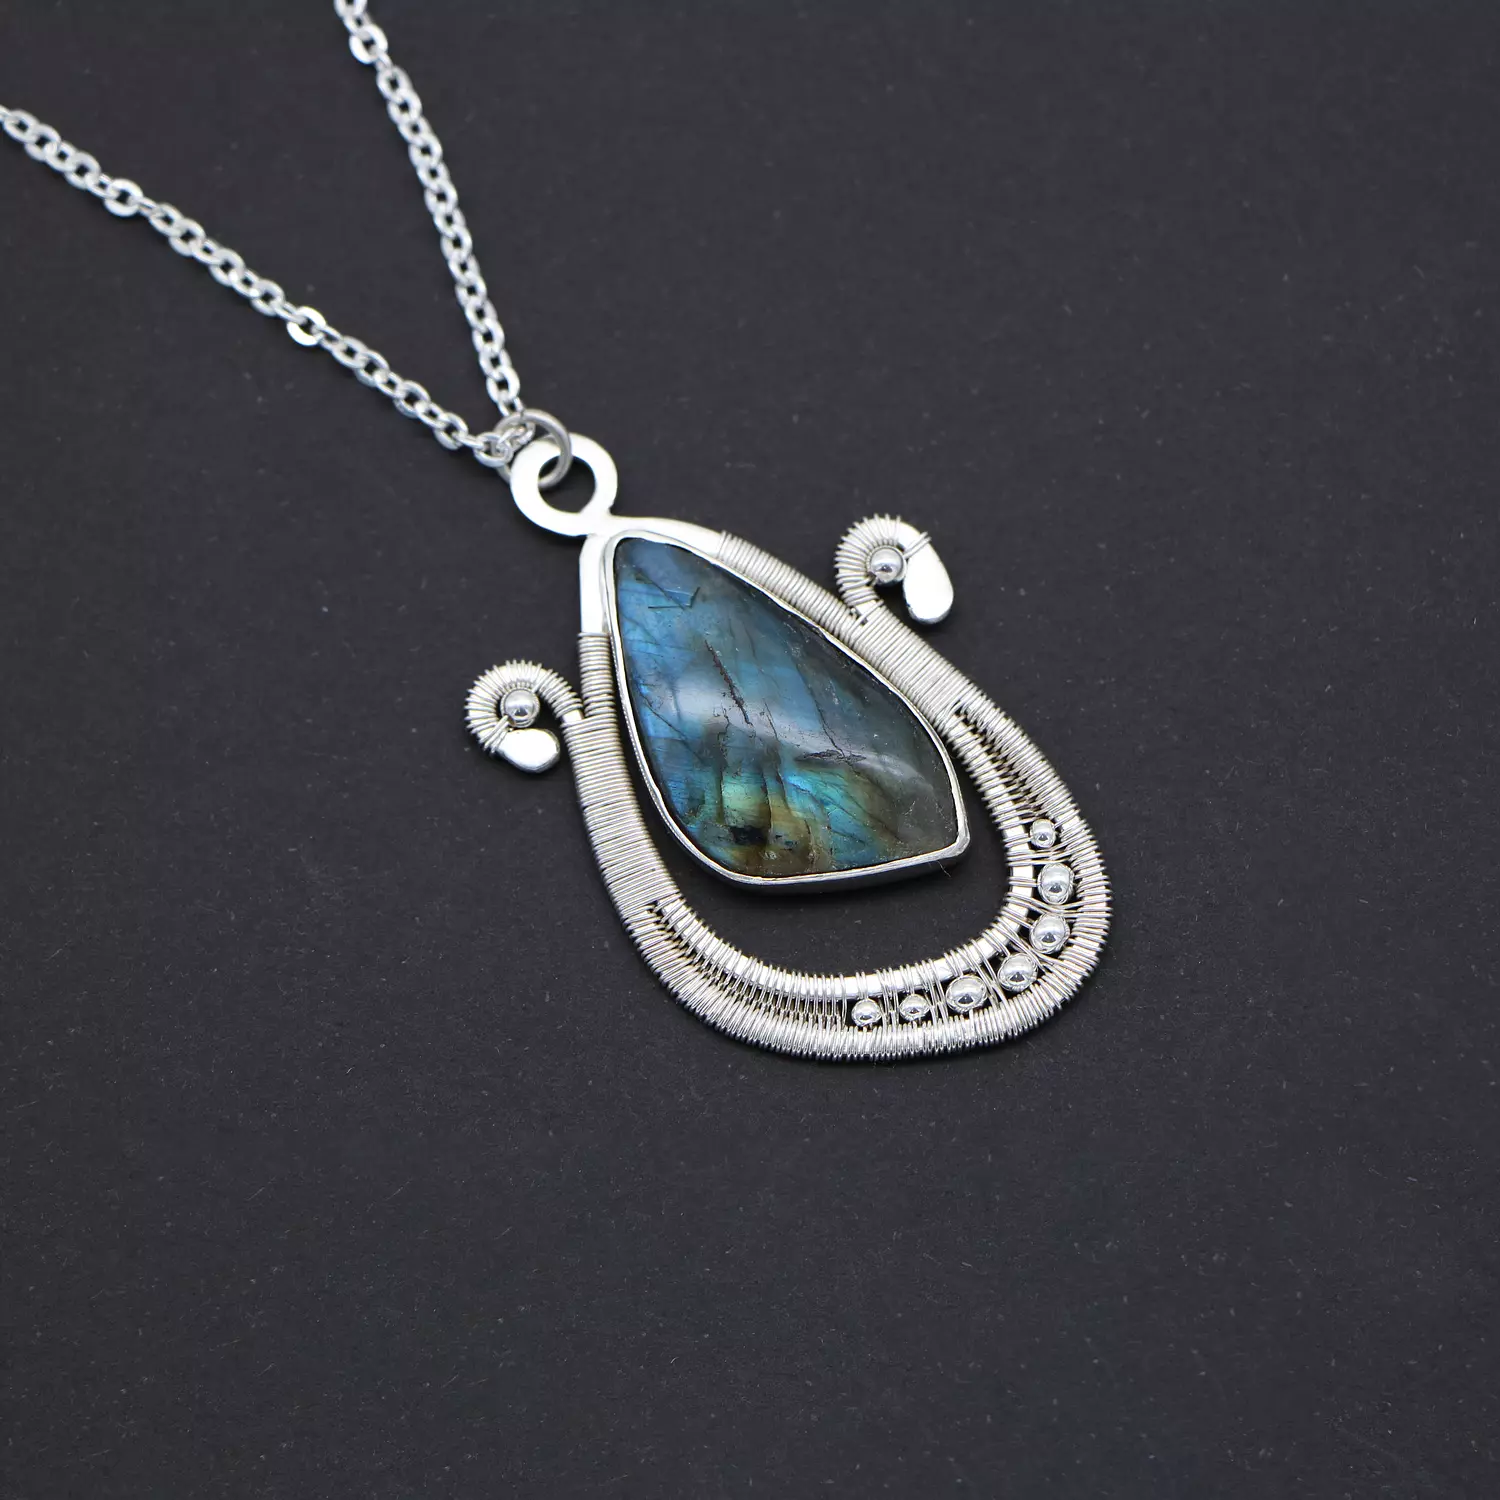 Wire wrapped silver 925 pendant with labradorite gemstone. 0